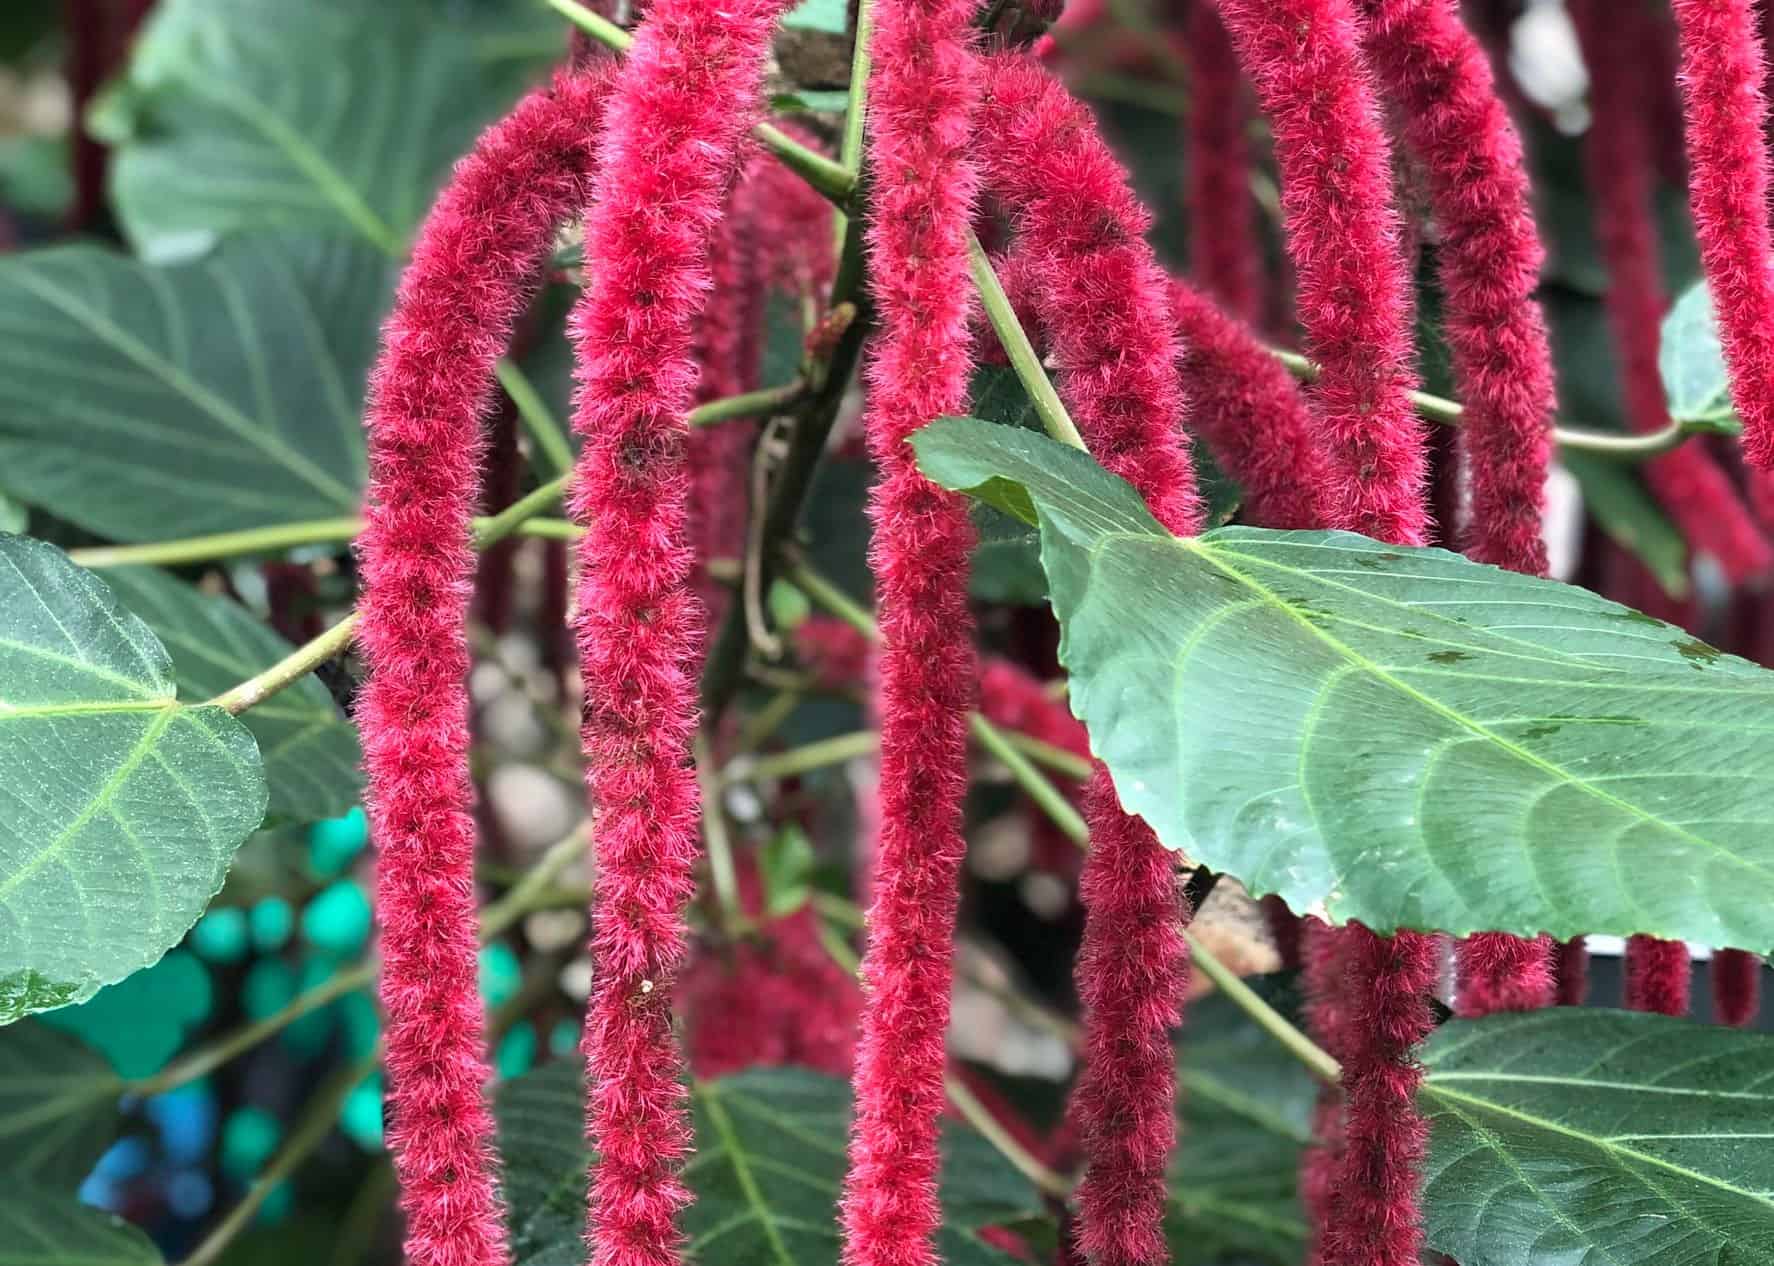 Chenille plants have long fuzzy flowers.